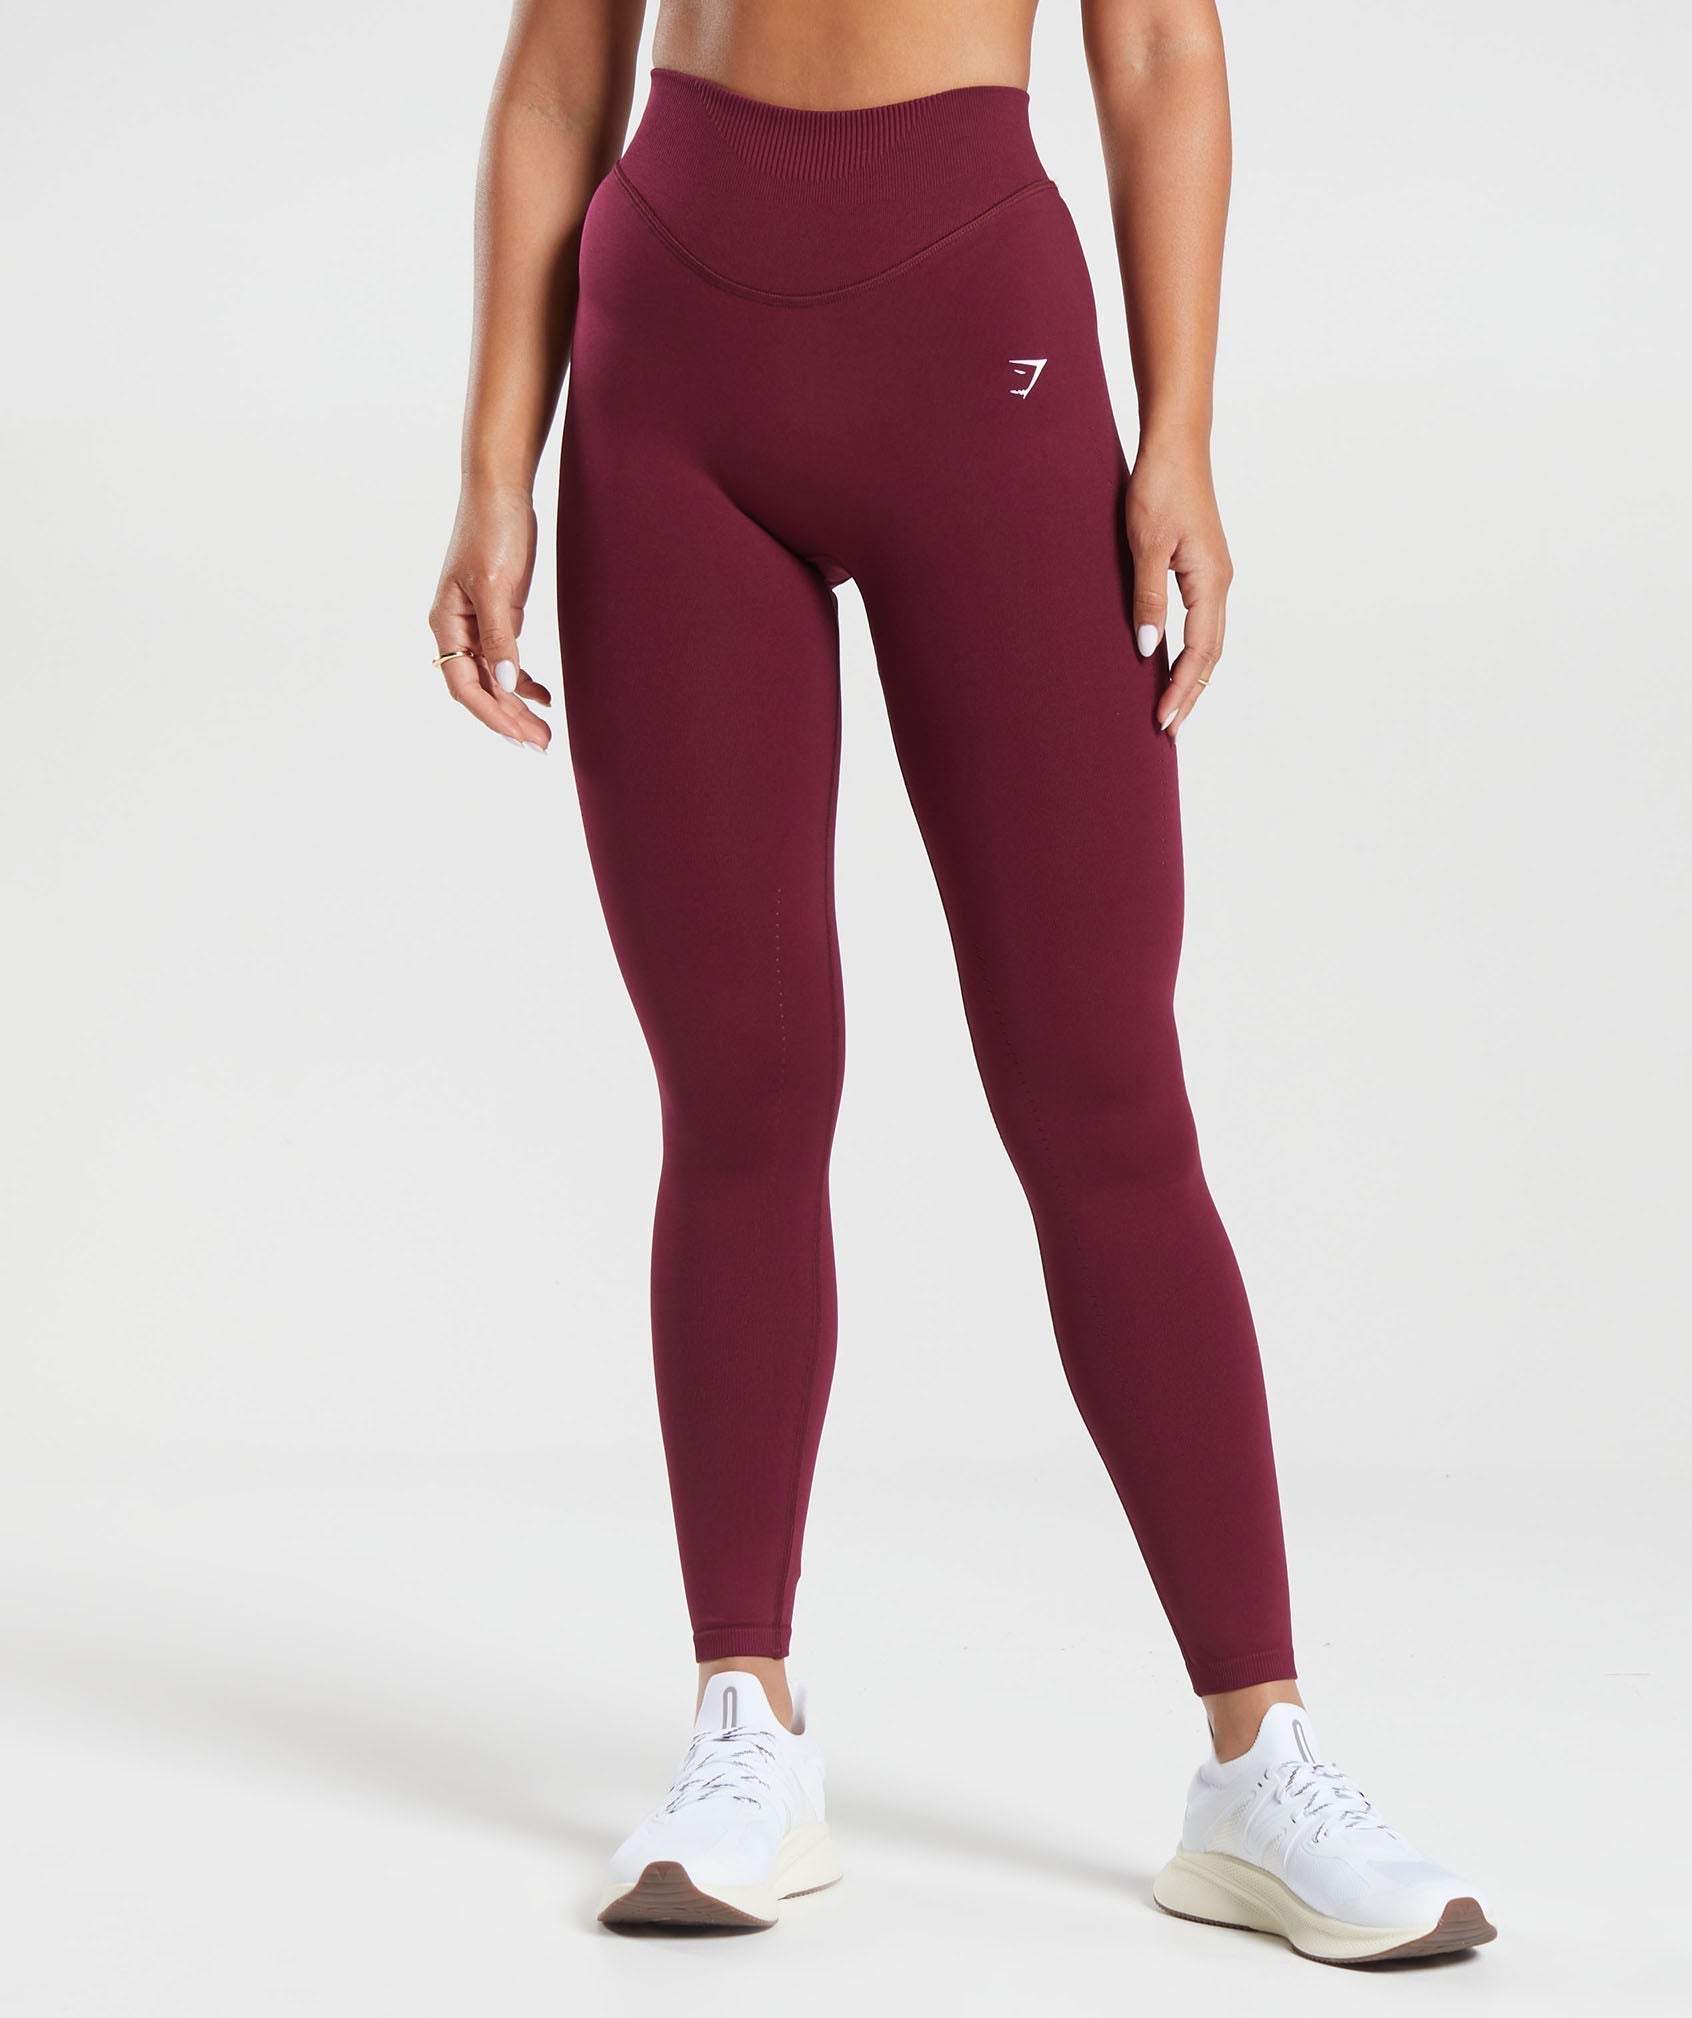 Gymshark Energy Seamless Leggings Women's Mauve Pink Cropped Mid Rise - $15  - From Destiny